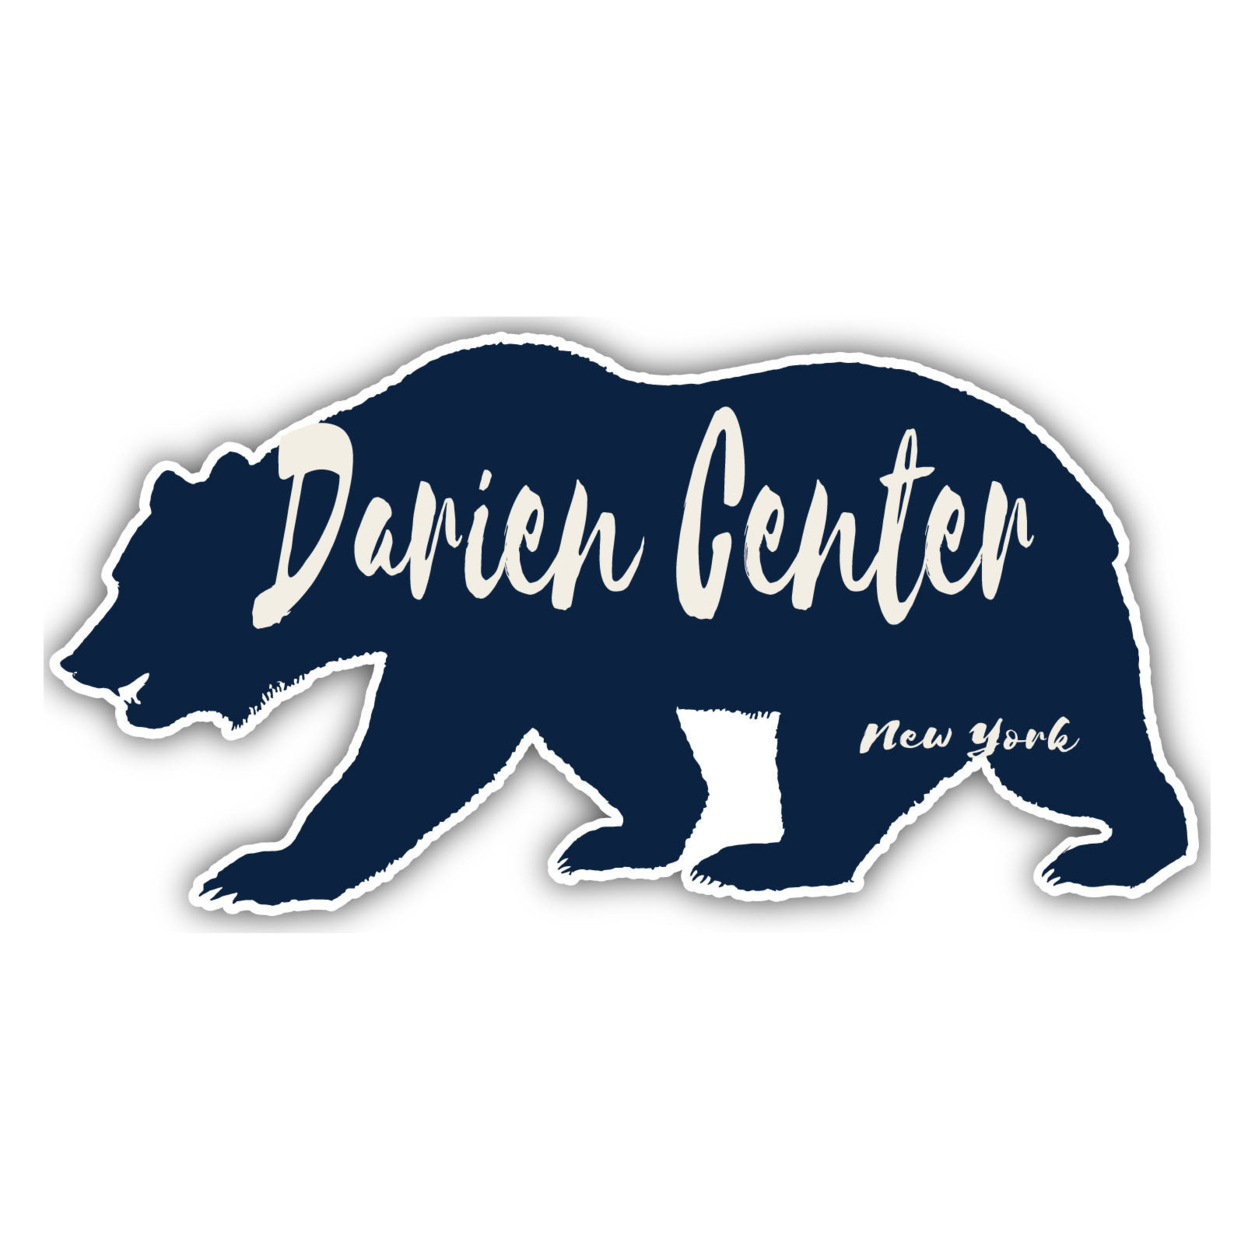 Darien Center New York Souvenir Decorative Stickers (Choose Theme And Size) - 4-Pack, 6-Inch, Tent